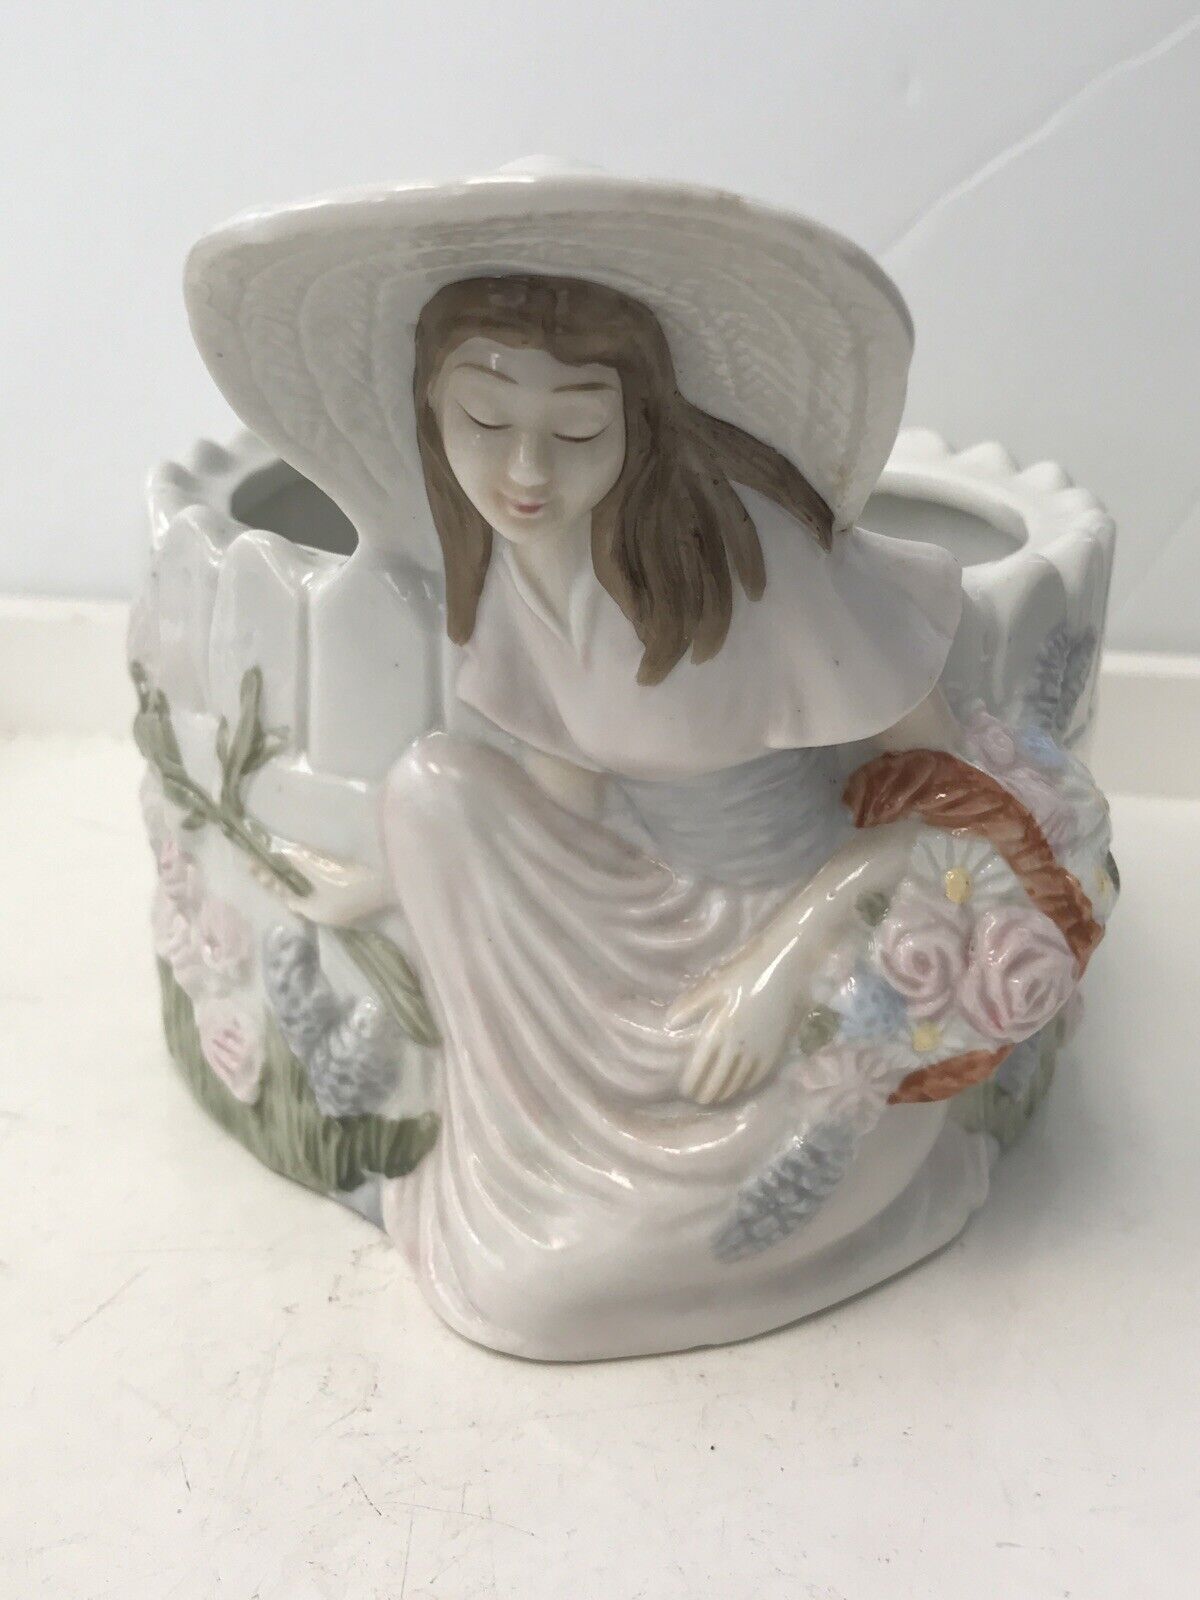 Teleflora Girl Planter Girl With Hat By Fence 1982 Tiawan 419